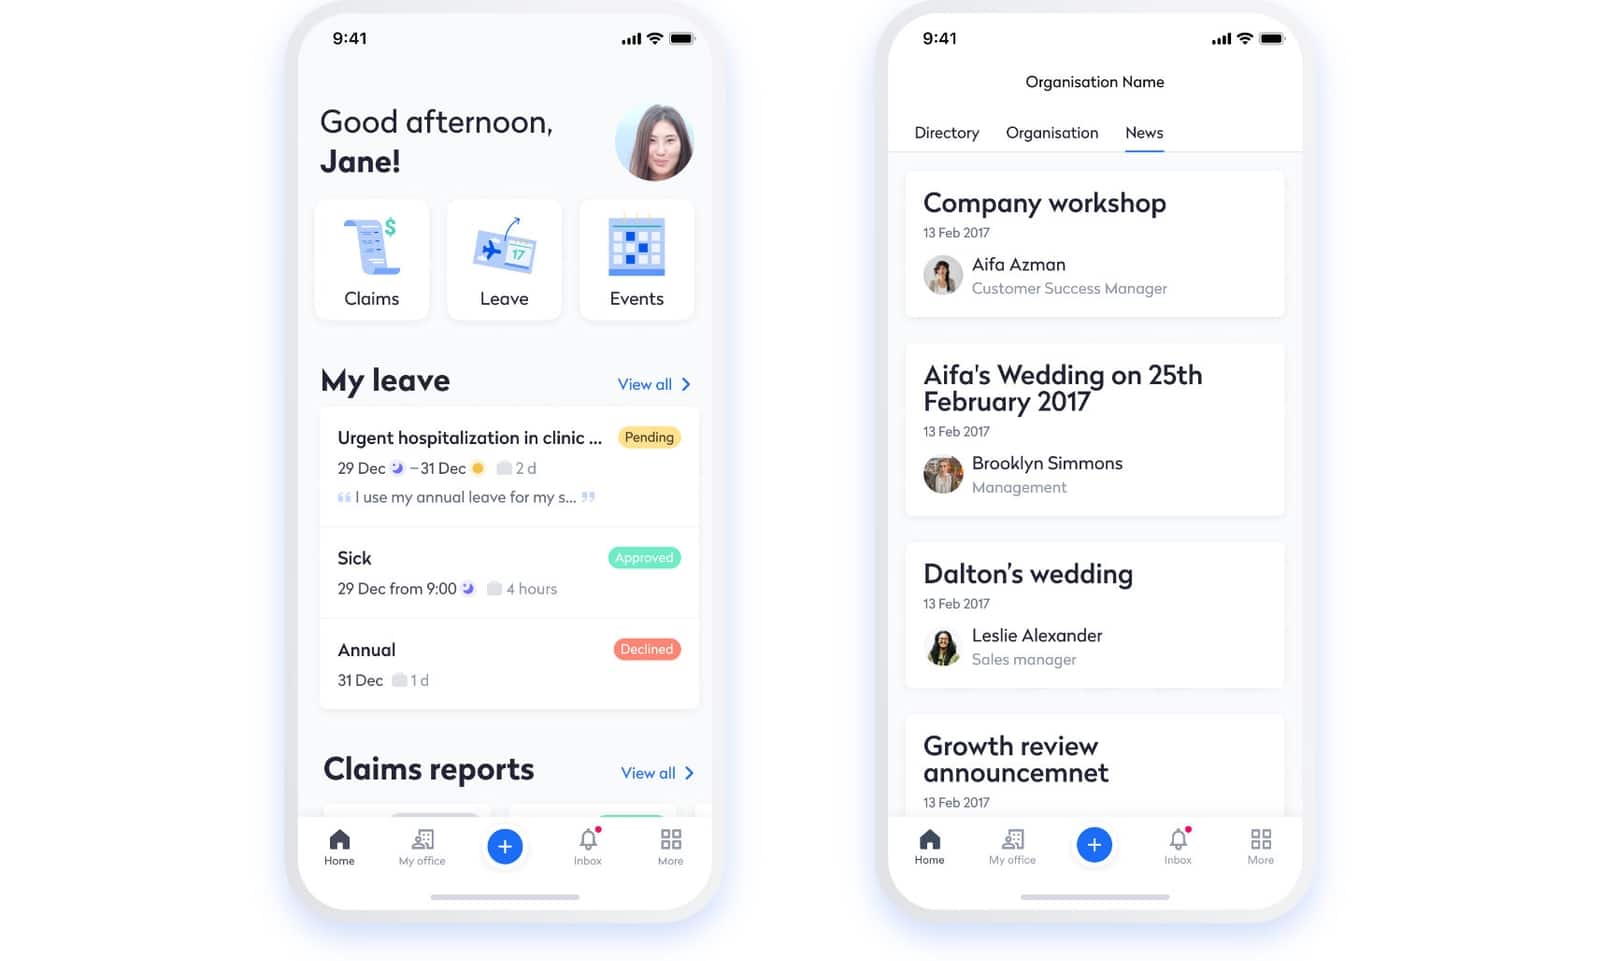 Swingvy mobile HR app dashboard and company news feed